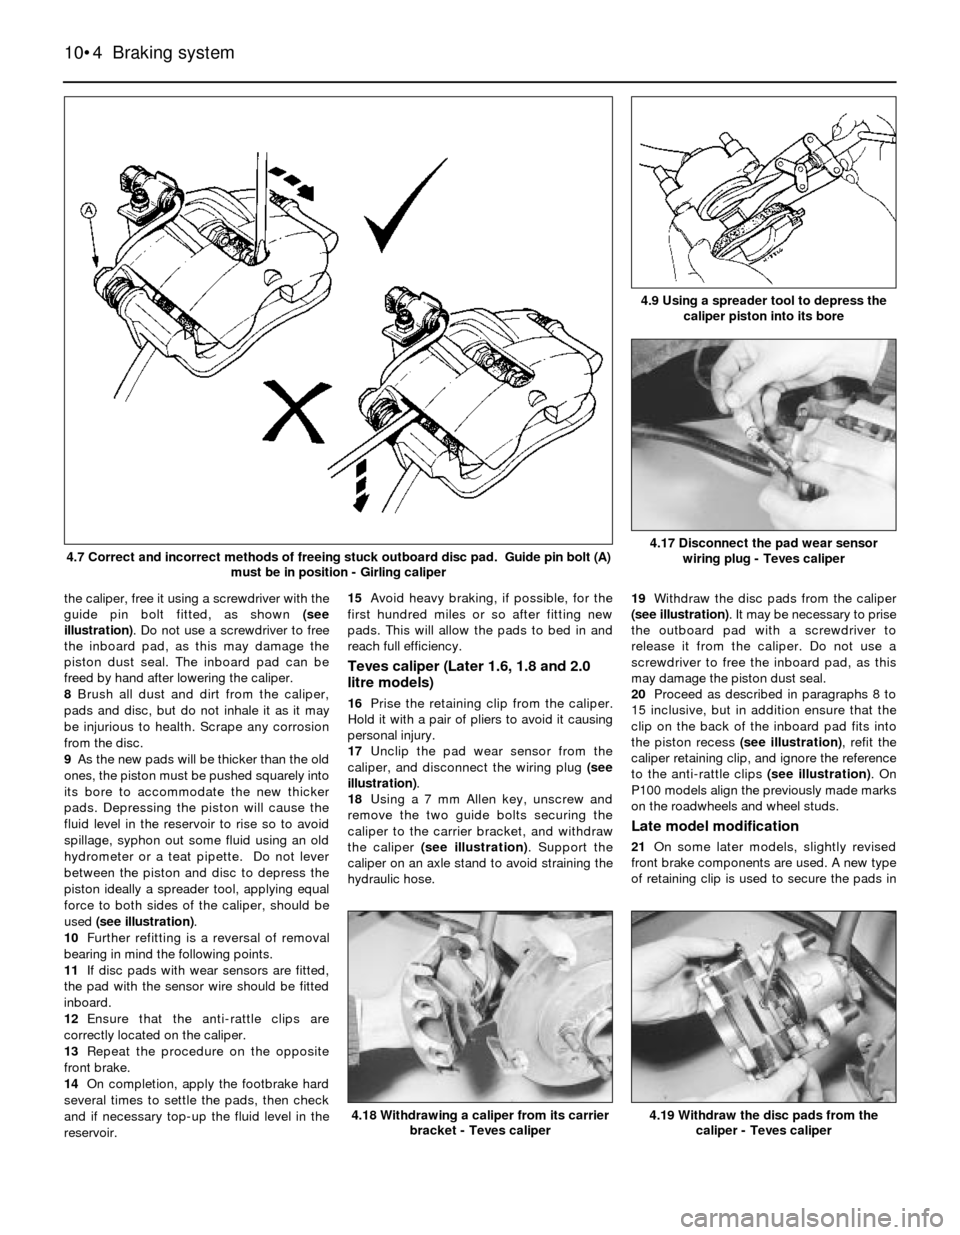 FORD SIERRA 1984 1.G Braking System Workshop Manual the caliper, free it using a screwdriver with the
guide pin bolt fitted, as shown (see
illustration). Do not use a screwdriver to free
the inboard pad, as this may damage the
piston dust seal. The inb